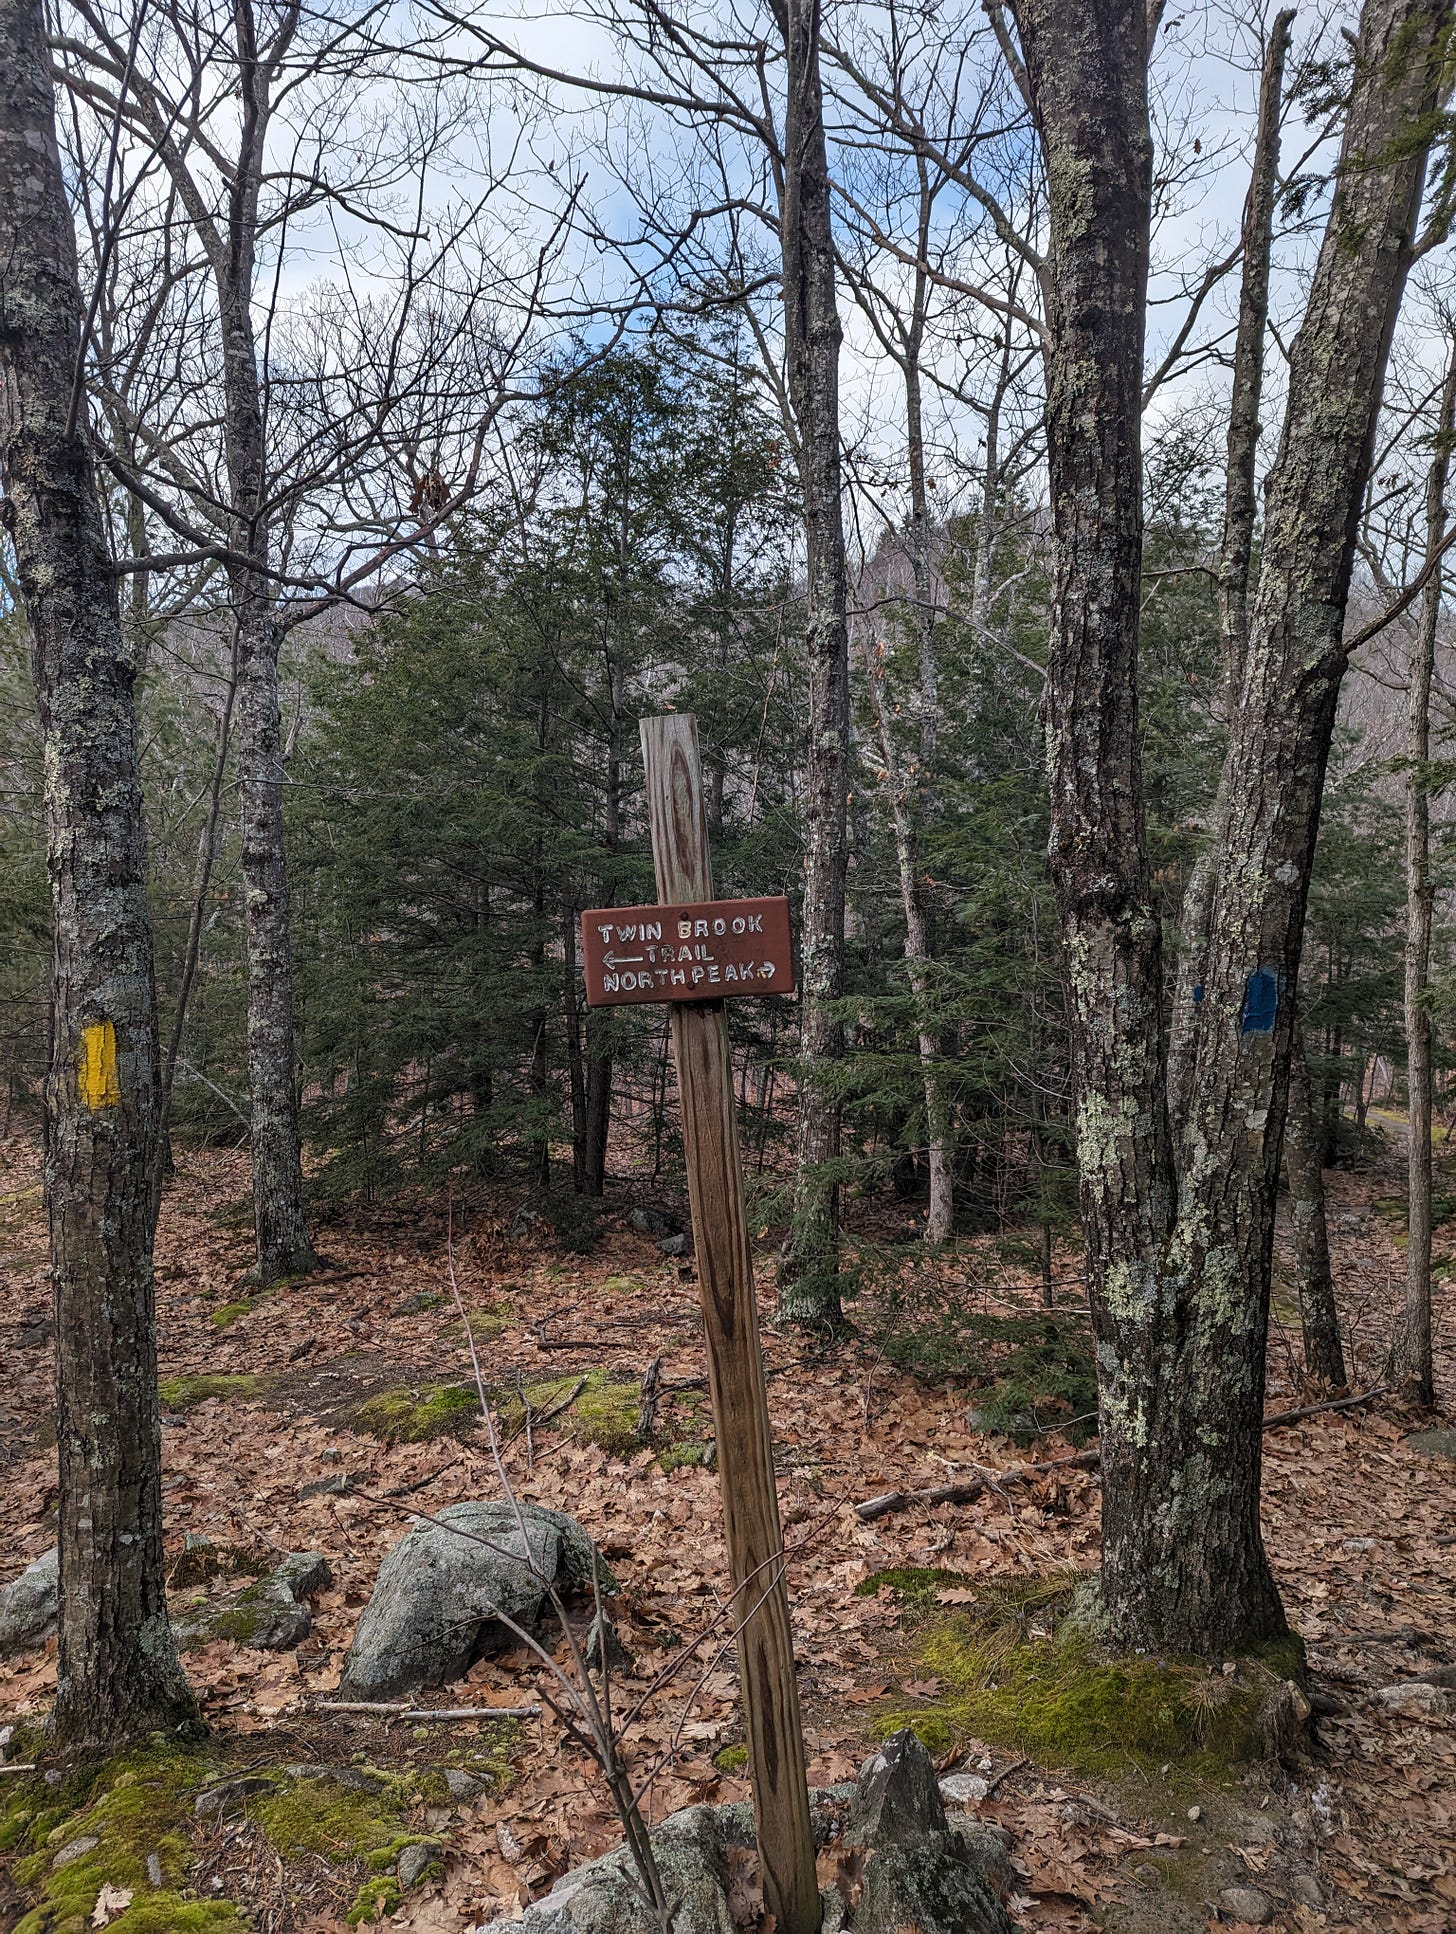 A photo of a trail sign. The sign points left for Twin Brook Trail and right for North Peak.